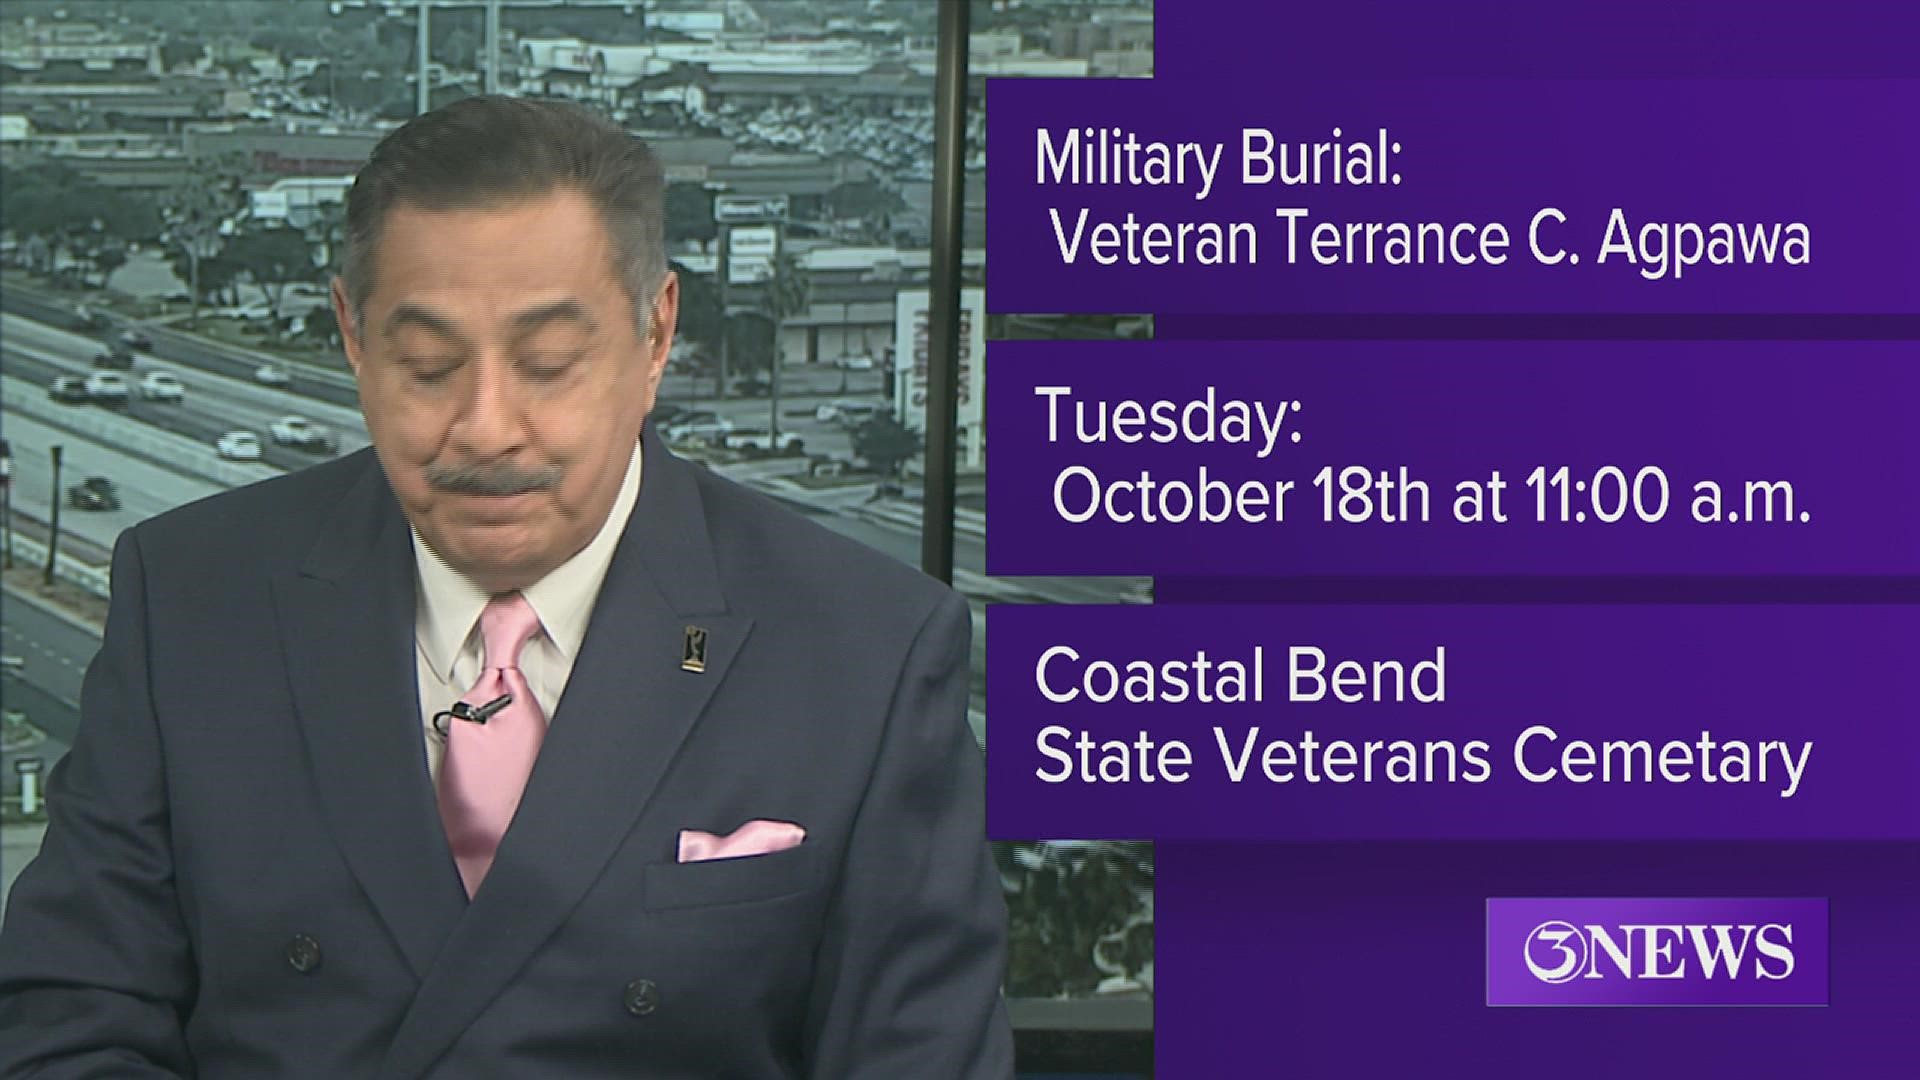 The burial will be on Oct. 18 at the Coastal Bend State Veterans Cemetery.